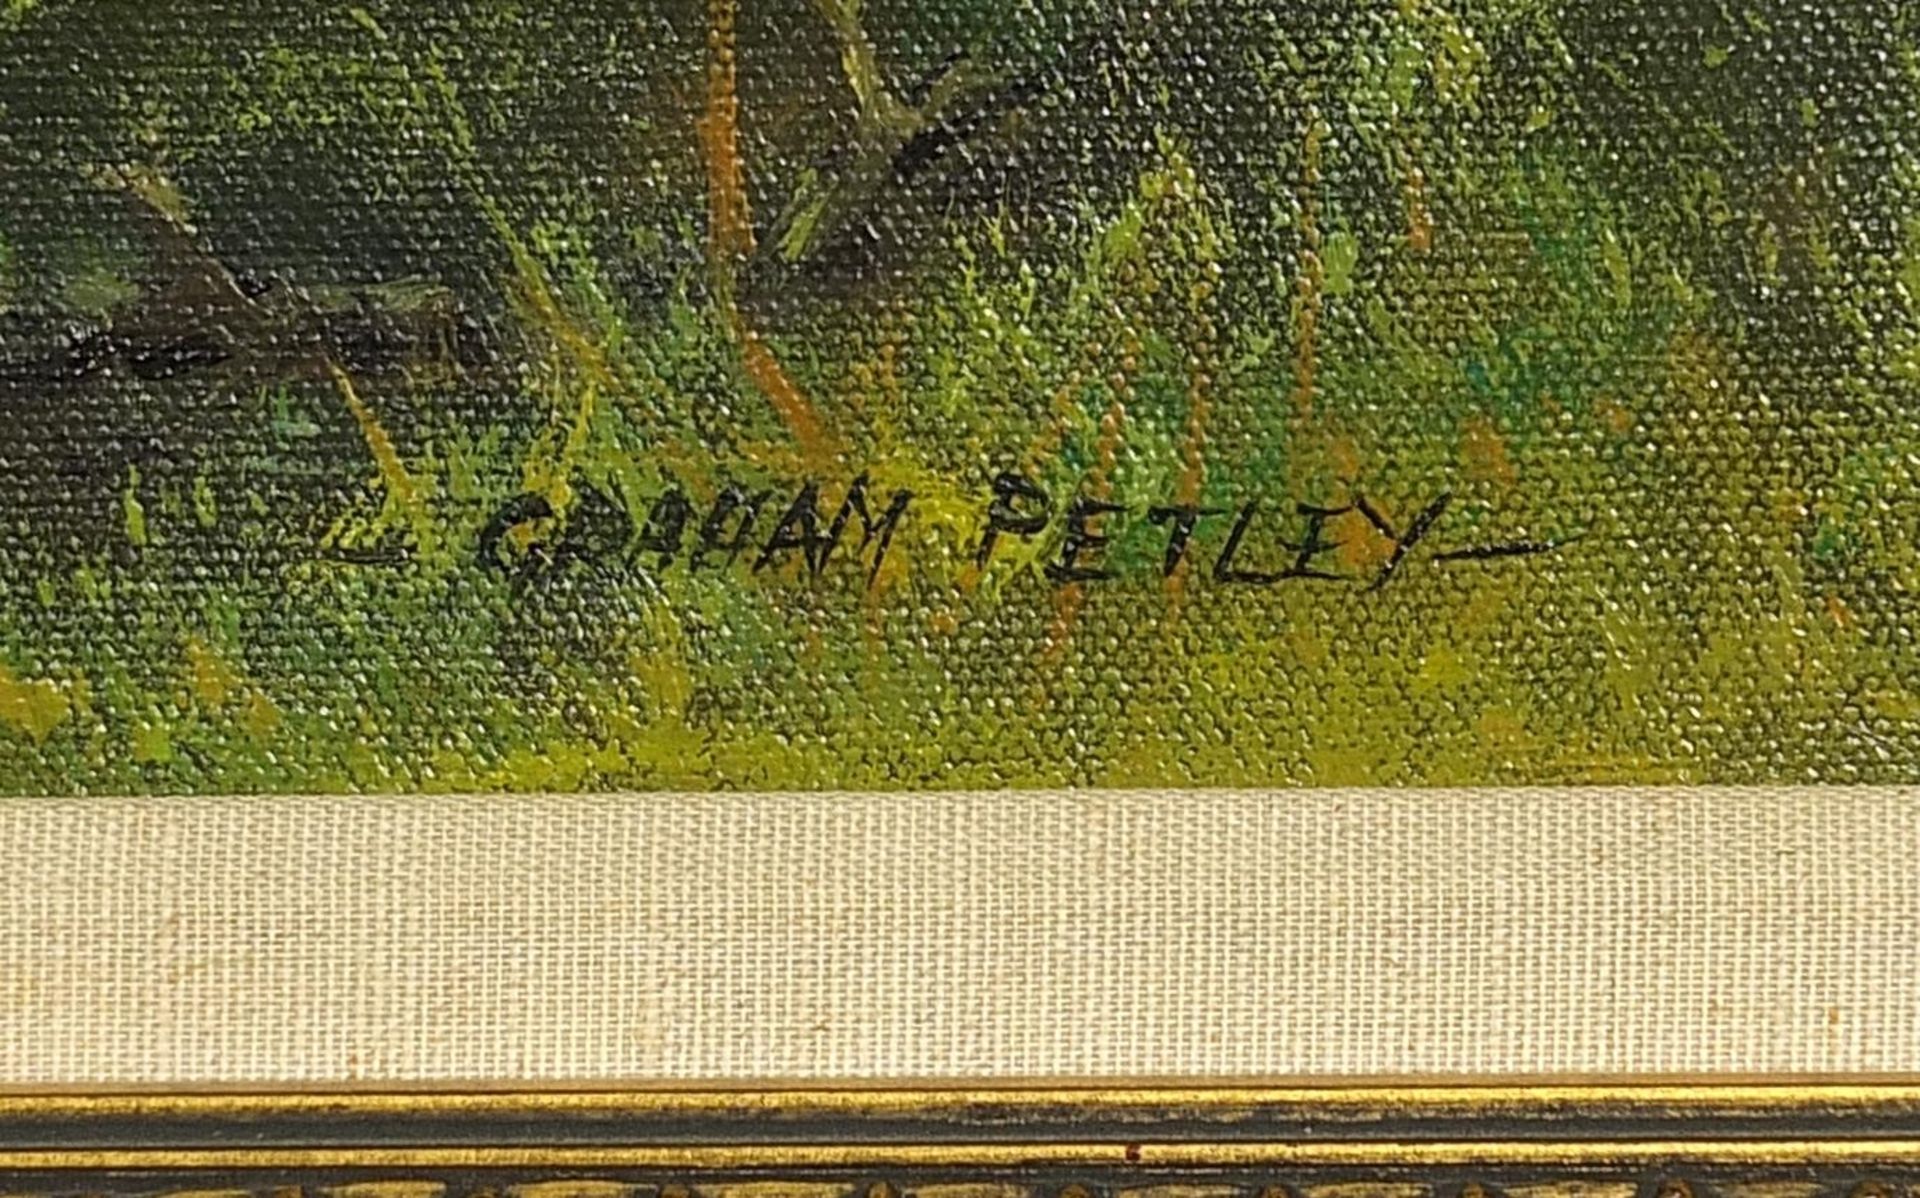 Graham Petley - Pan Lane, Hanningfield, oil on canvas, inscribed E Stacy Marks label verso, - Image 3 of 5